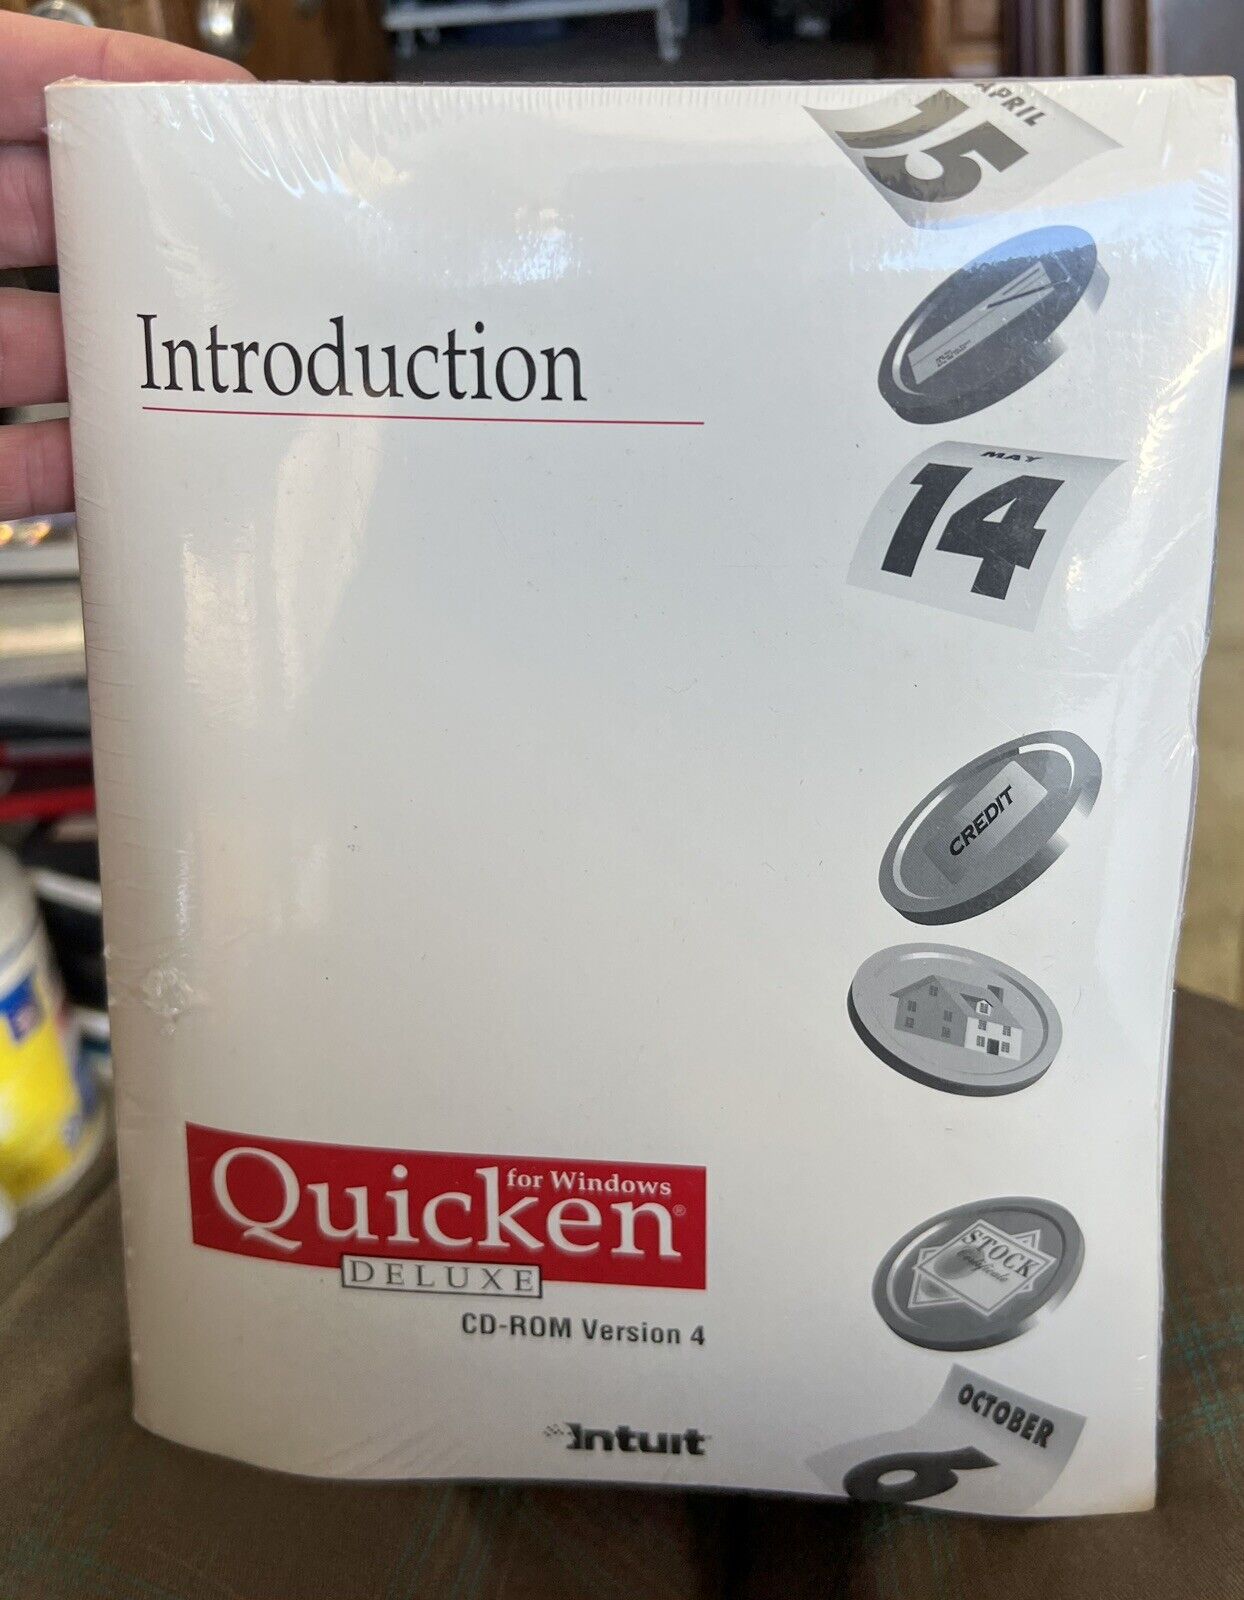 Vtg Sealed Intuit Introduction for Windows Quicken Deluxe CD-ROM Version 4